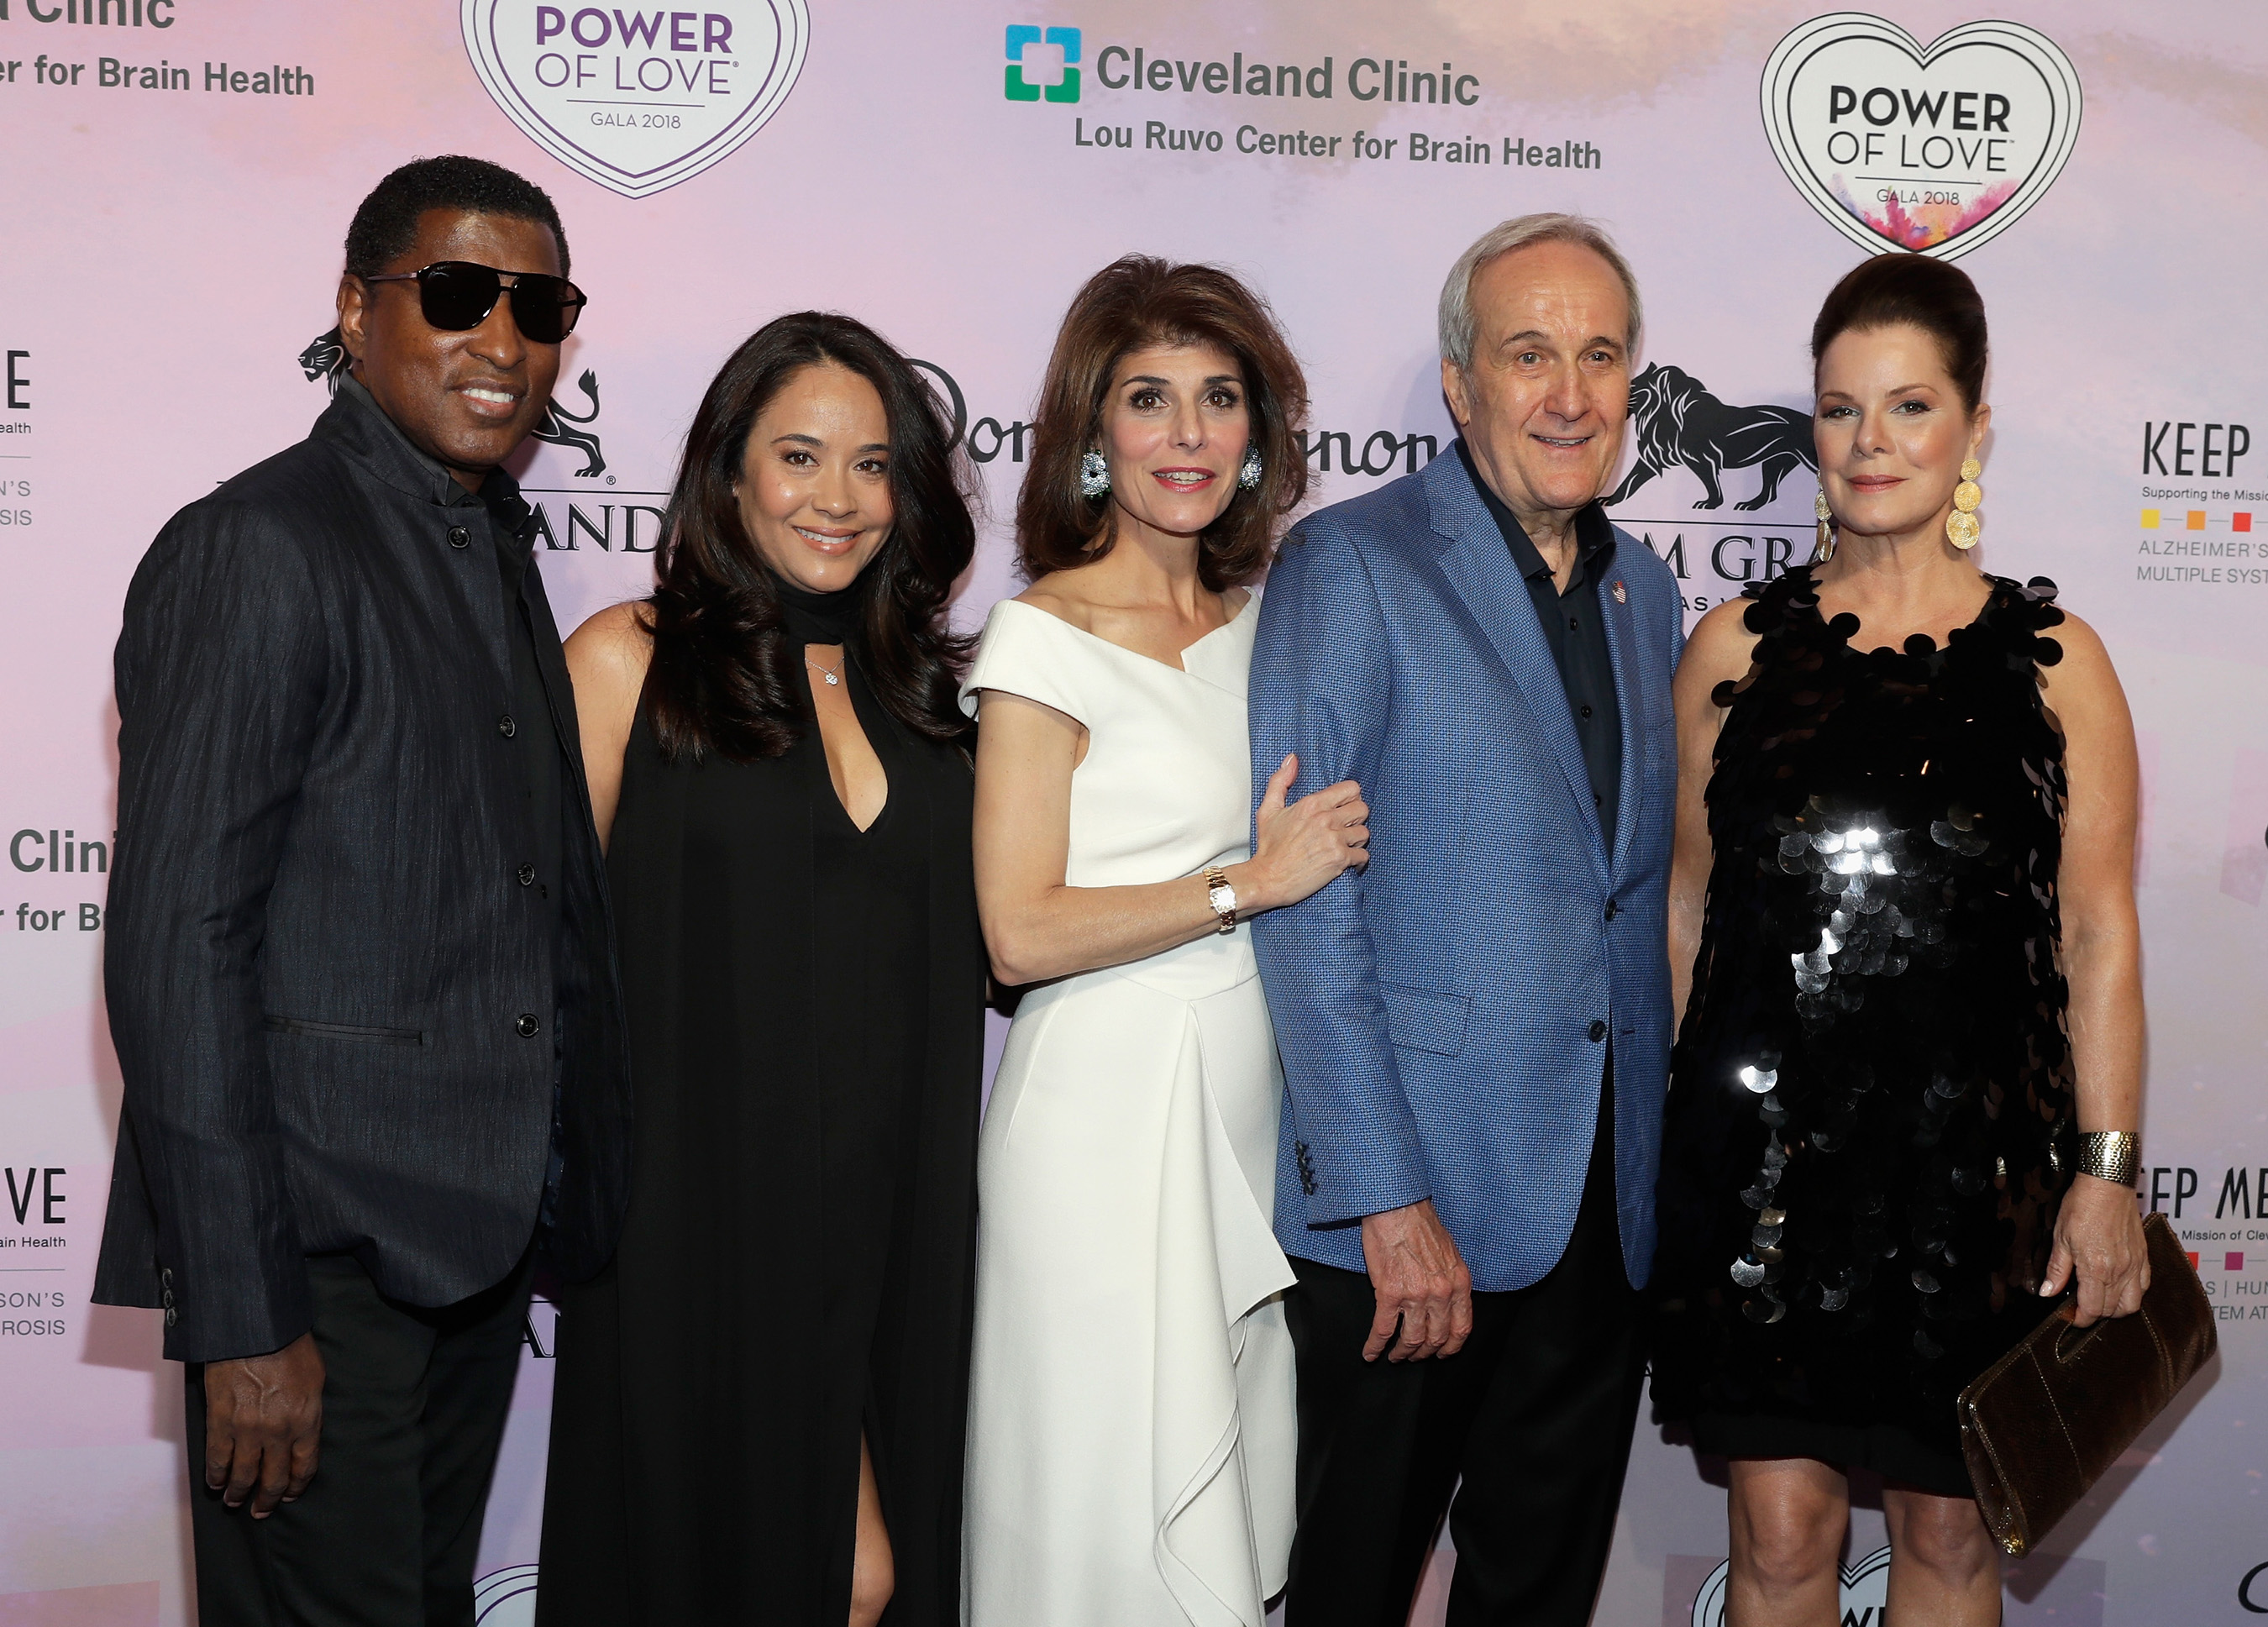 Kenny “Babyface” Edmonds, Nicole Pantenburg, Camille Ruvo, Larry Ruvo and Marcia Gay Harden at Keep Memory Alive's 22nd annual Power of Love® gala, April 28 at MGM Grand Garden Arena